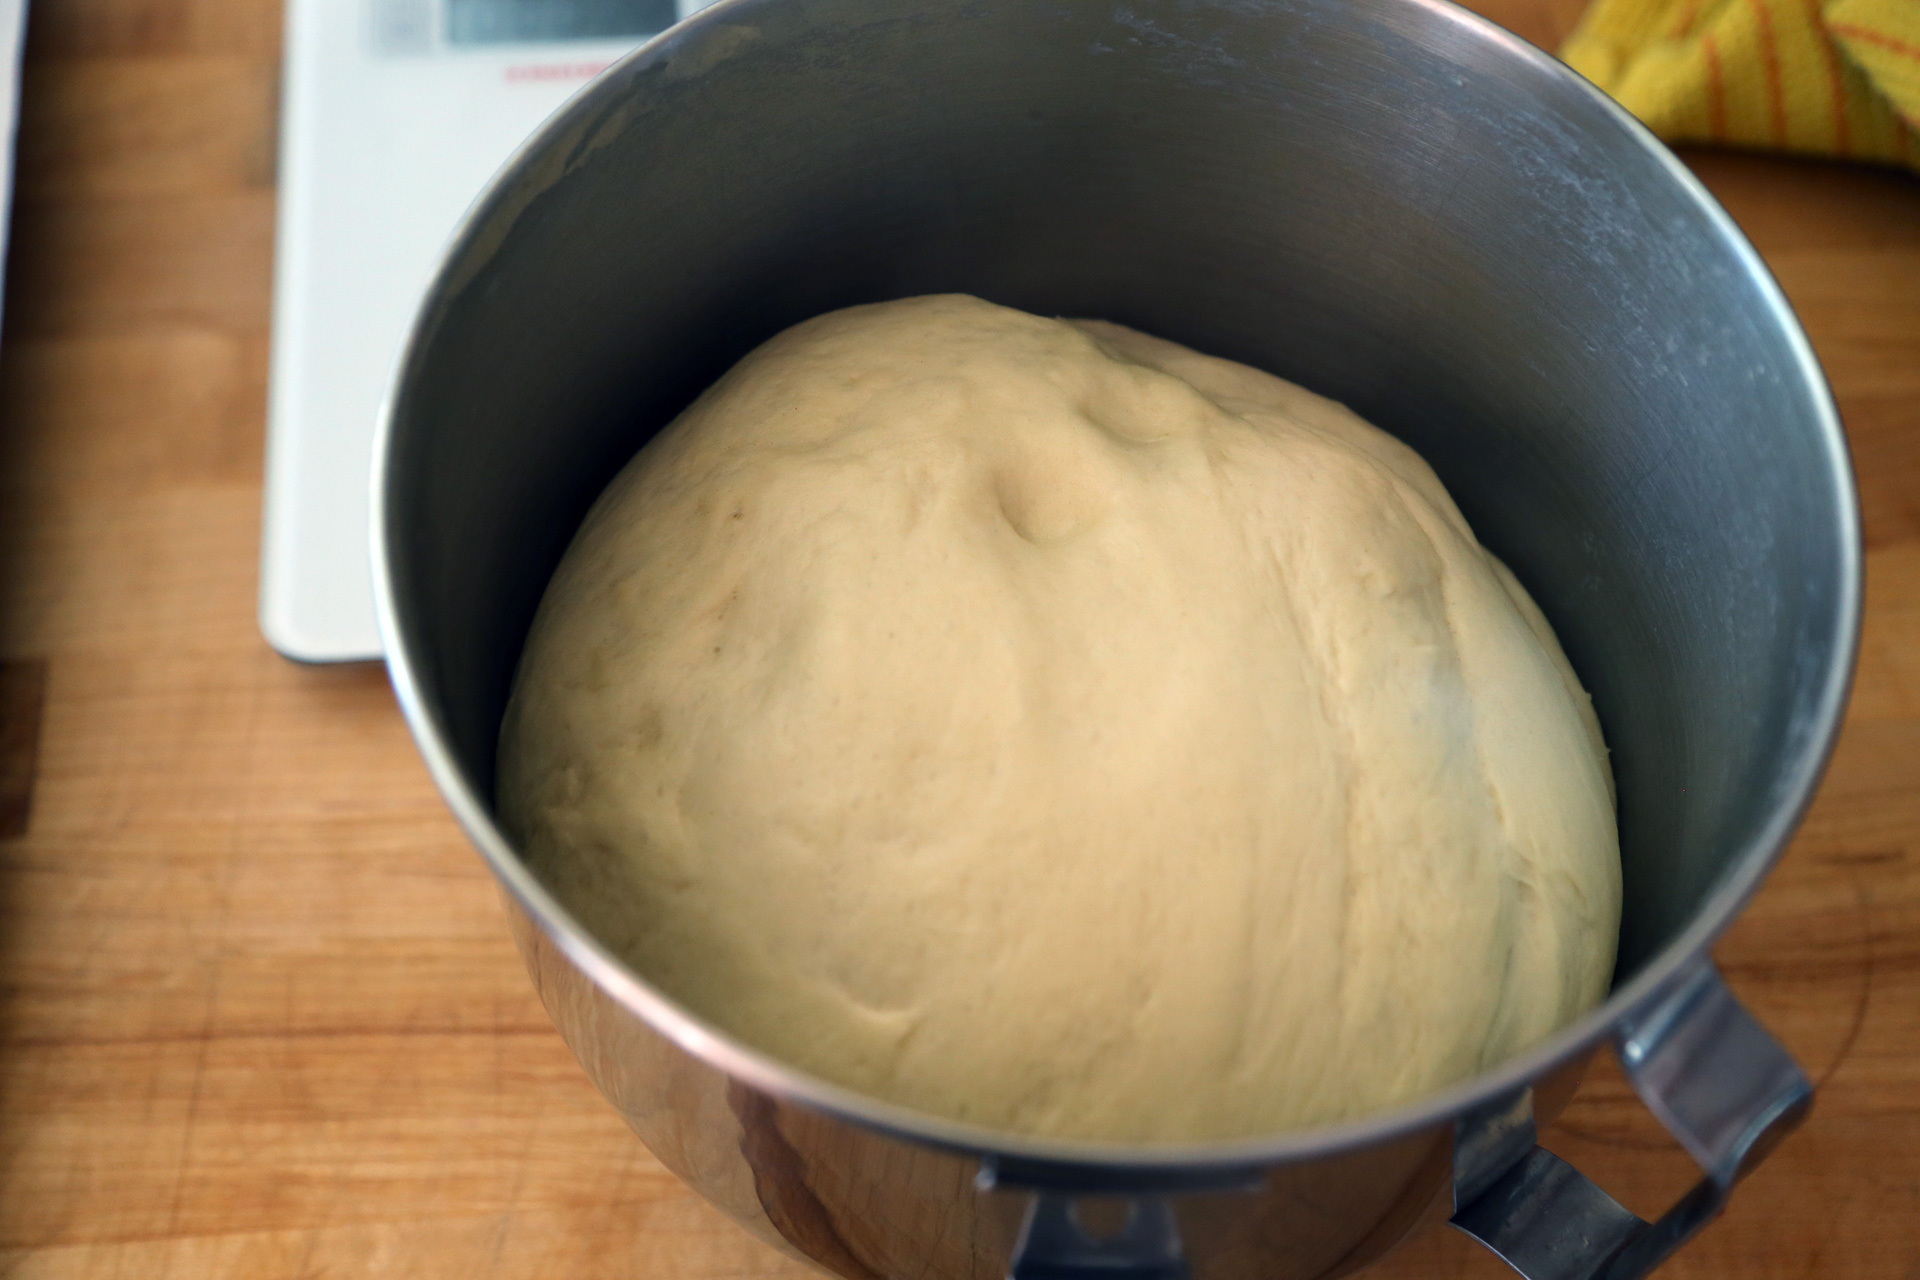 Let the dough rise at room temperature for about 1 hour or until doubled in size.